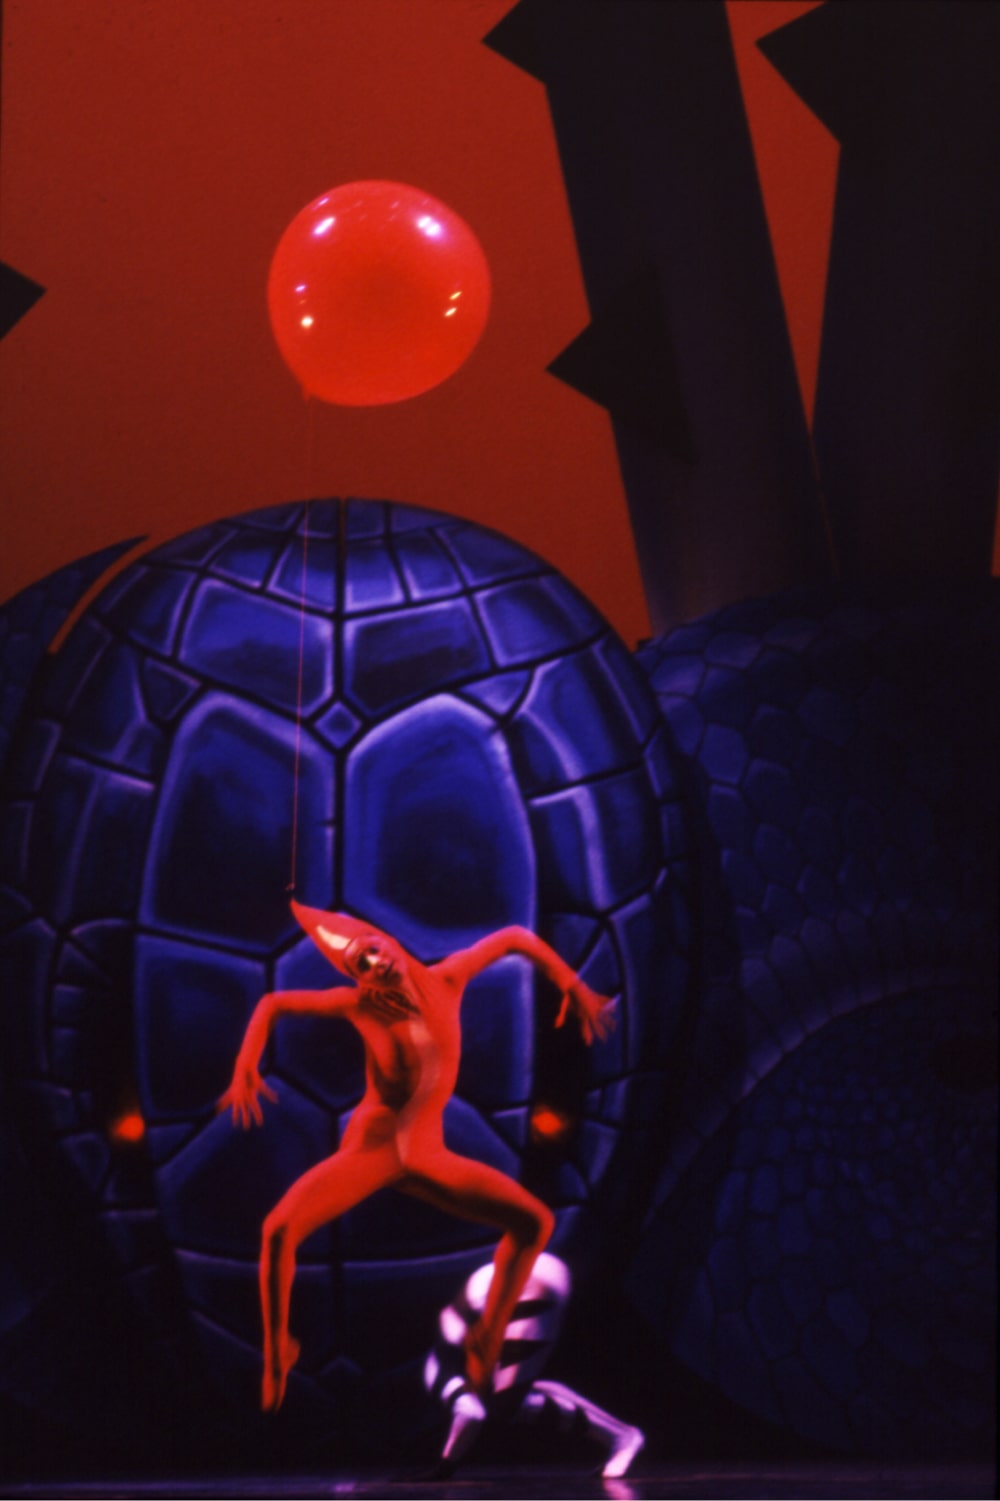 Dancer in red leotard and pointy hat leaps with red balloon in front of ominous snake head against red sky.